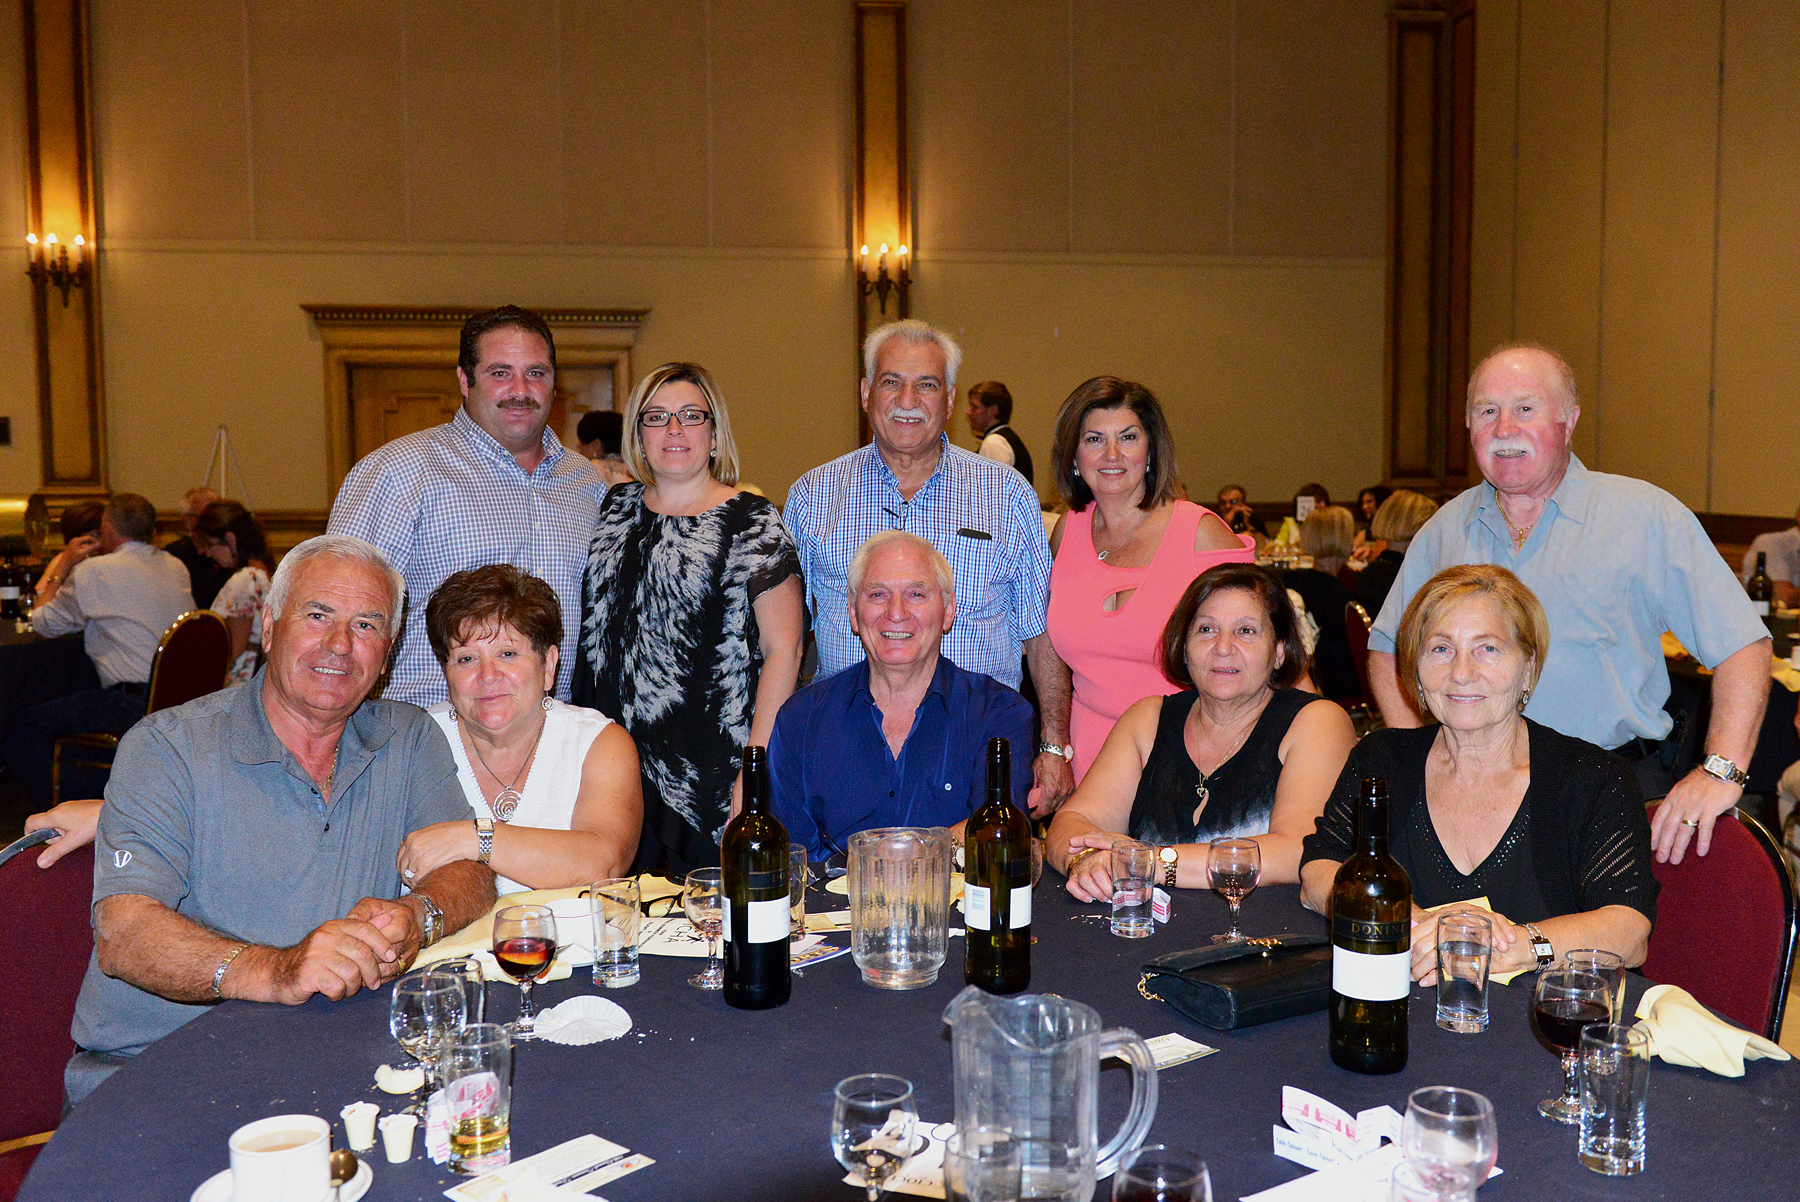 ICHA Summer Fundraiser guests sit for dinner